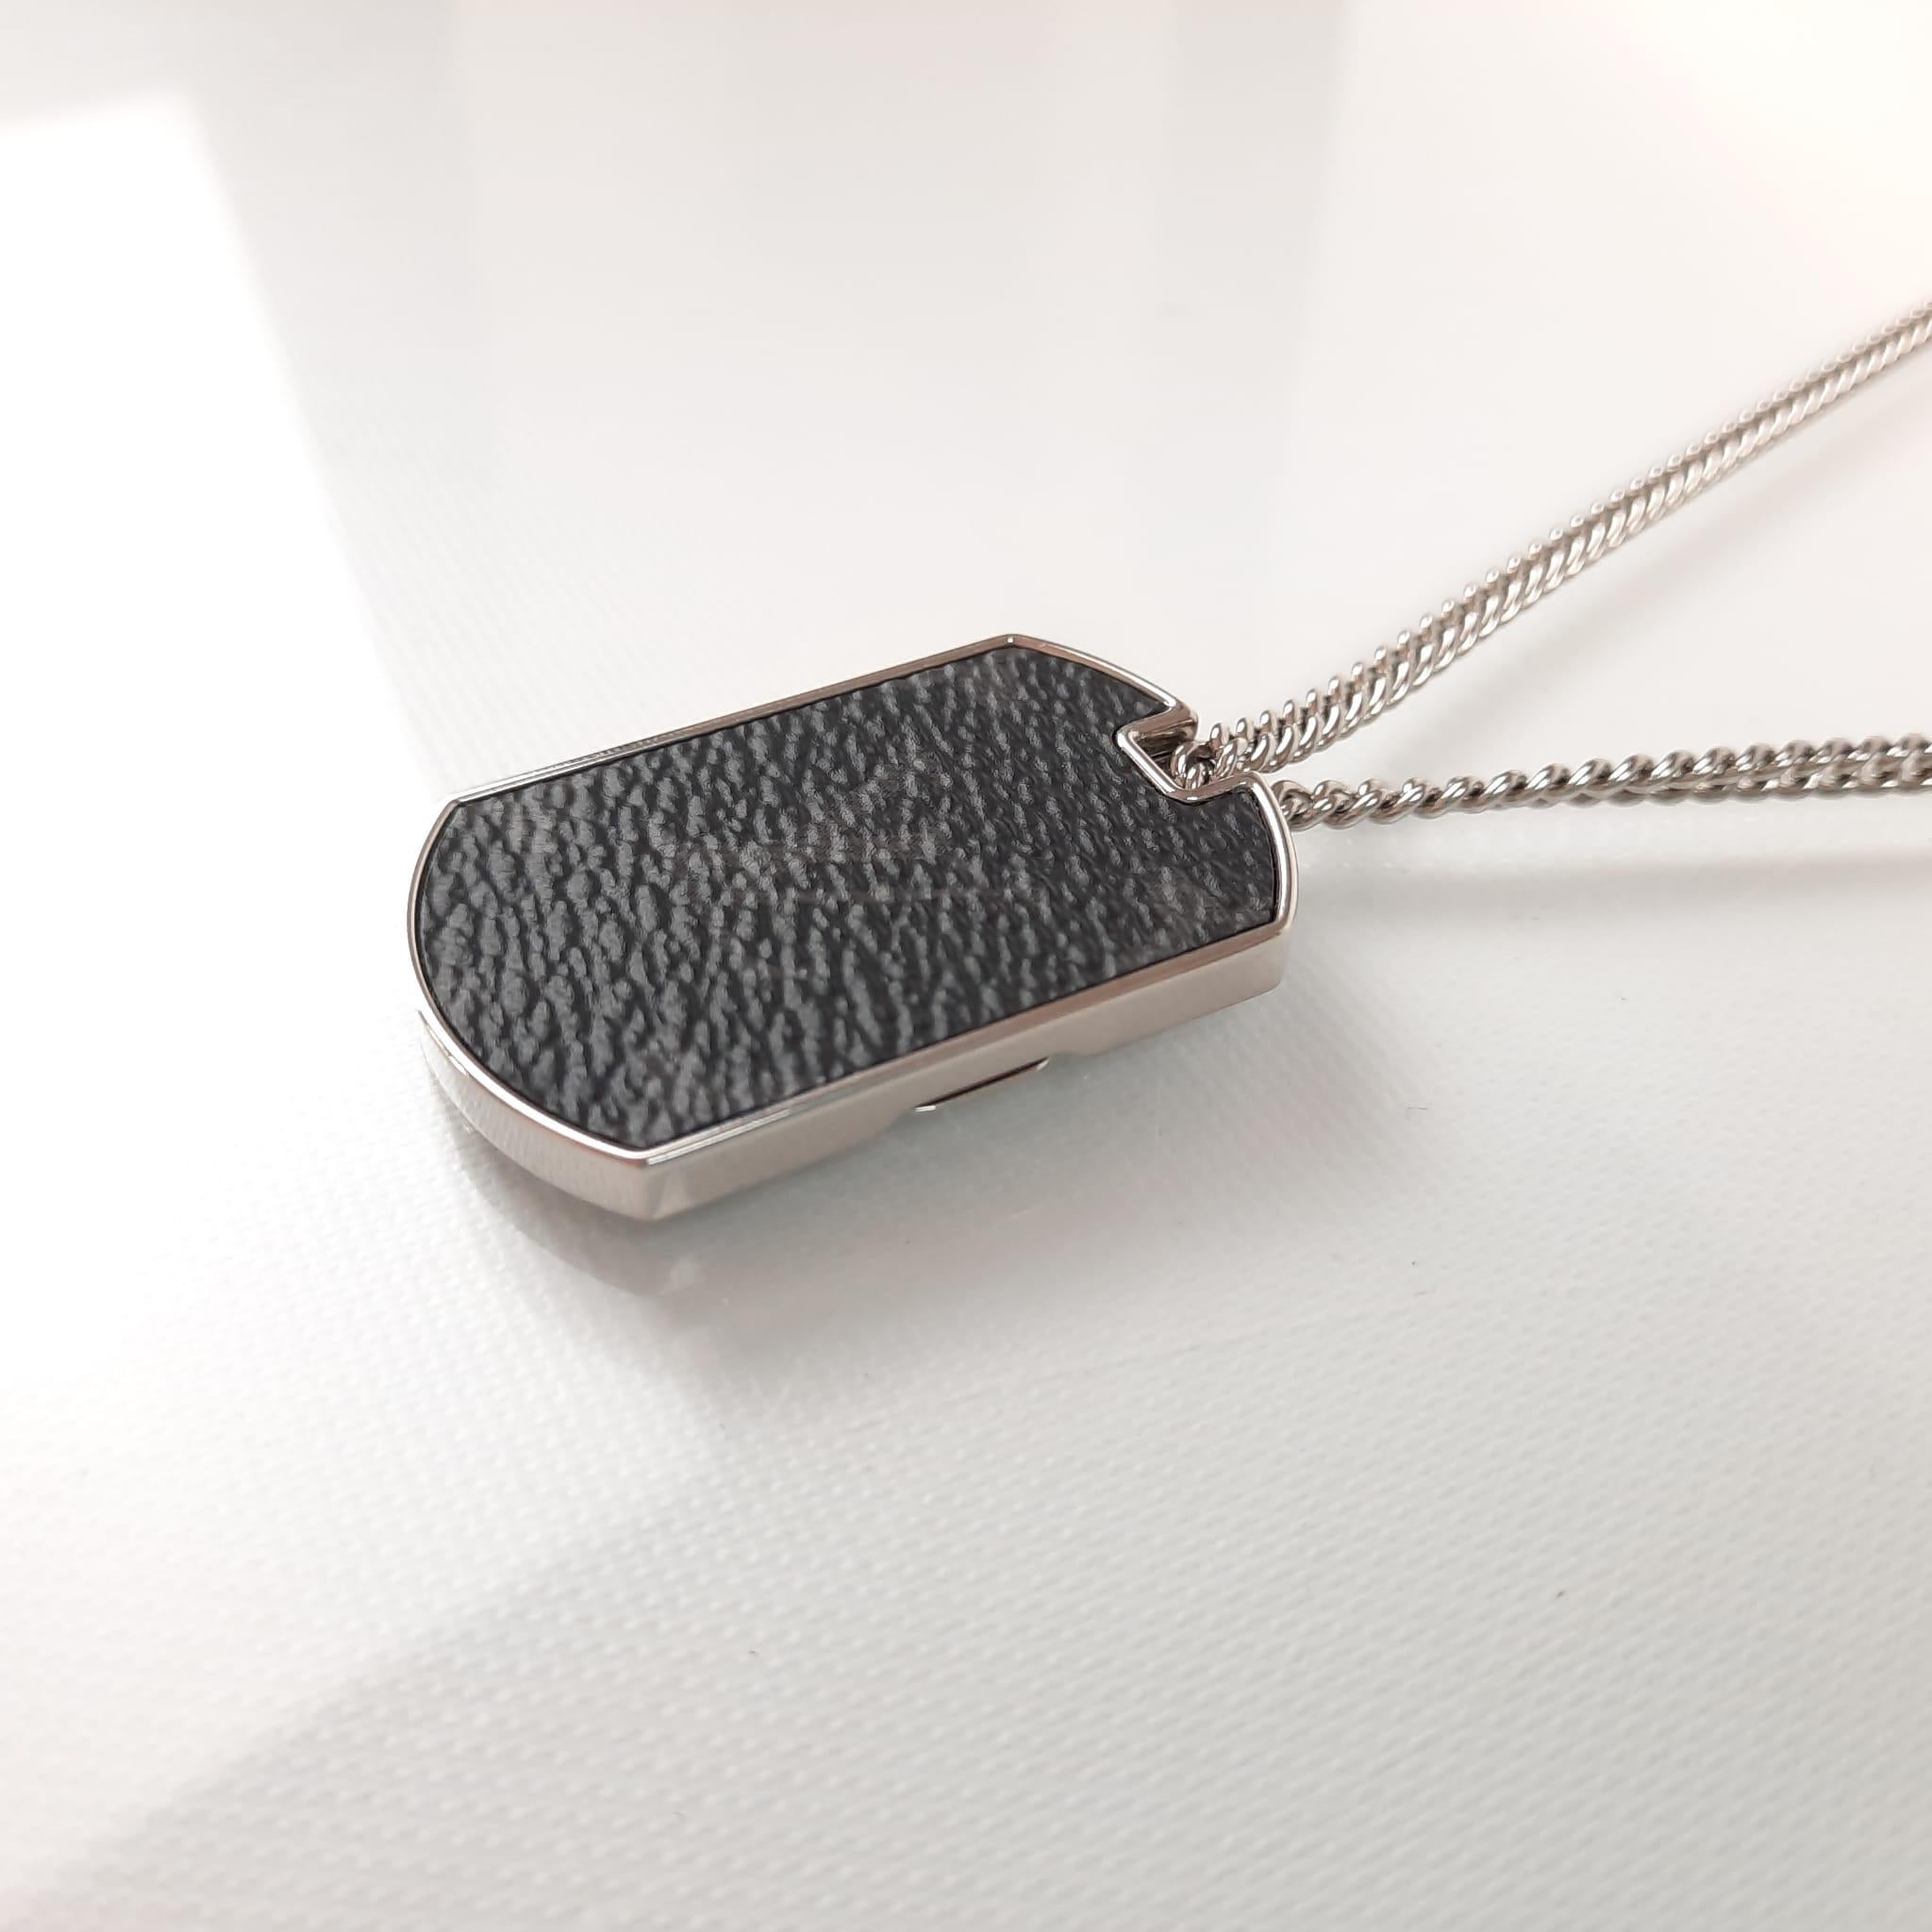 With its iconic Monogram Eclipse canvas sheathed directly onto metal, this must-have necklace has a sophisticated masculine feel. Like an amulet, its plate hinges open to provide its wearer with a secret hiding place.
Plate: 2.8 x 4.4 cm
80% zamak,